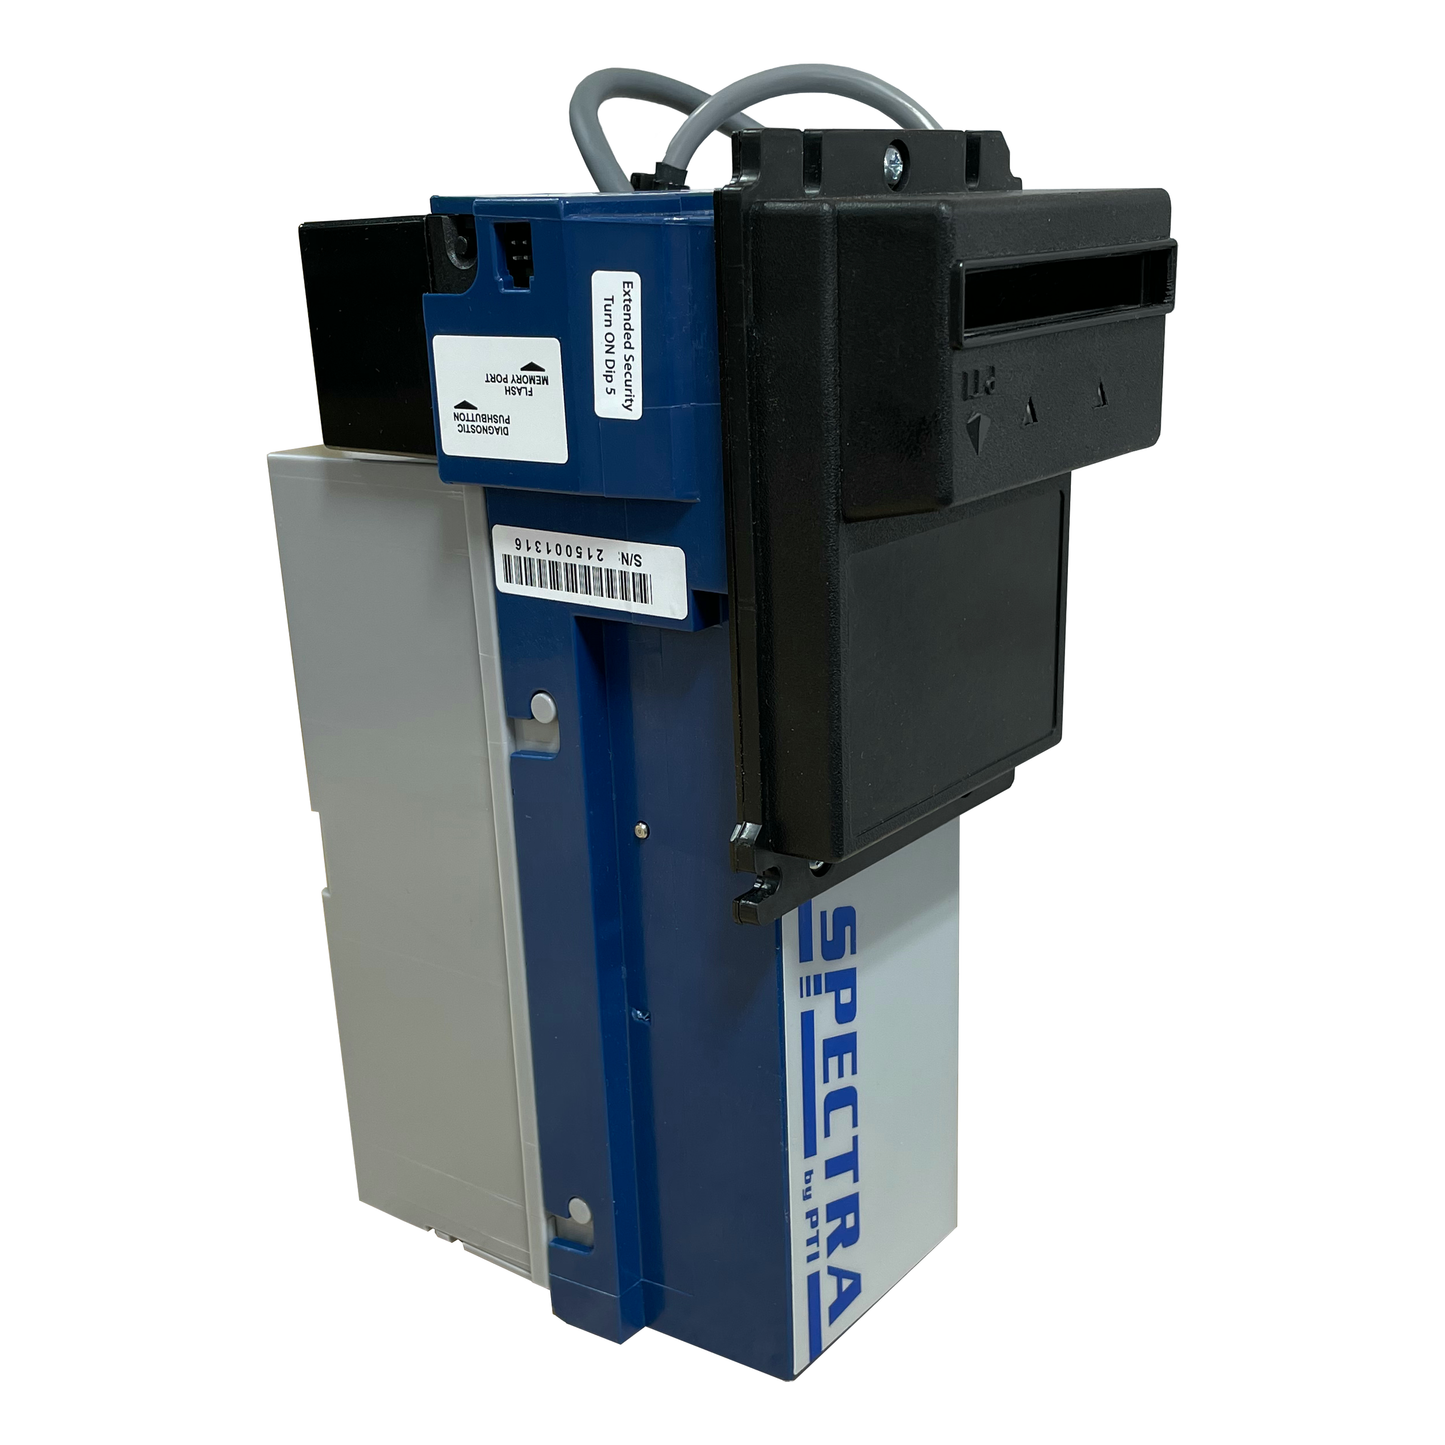 Pyramid APEX SPECTRA Bill Validator S600-UC1 (USA) has been added to the Apex line of products that showcases a highly luminescent bezel design with drains for dust and debris.  This is in conjunction with the Dual Configuration mode that customers have come to rely on.